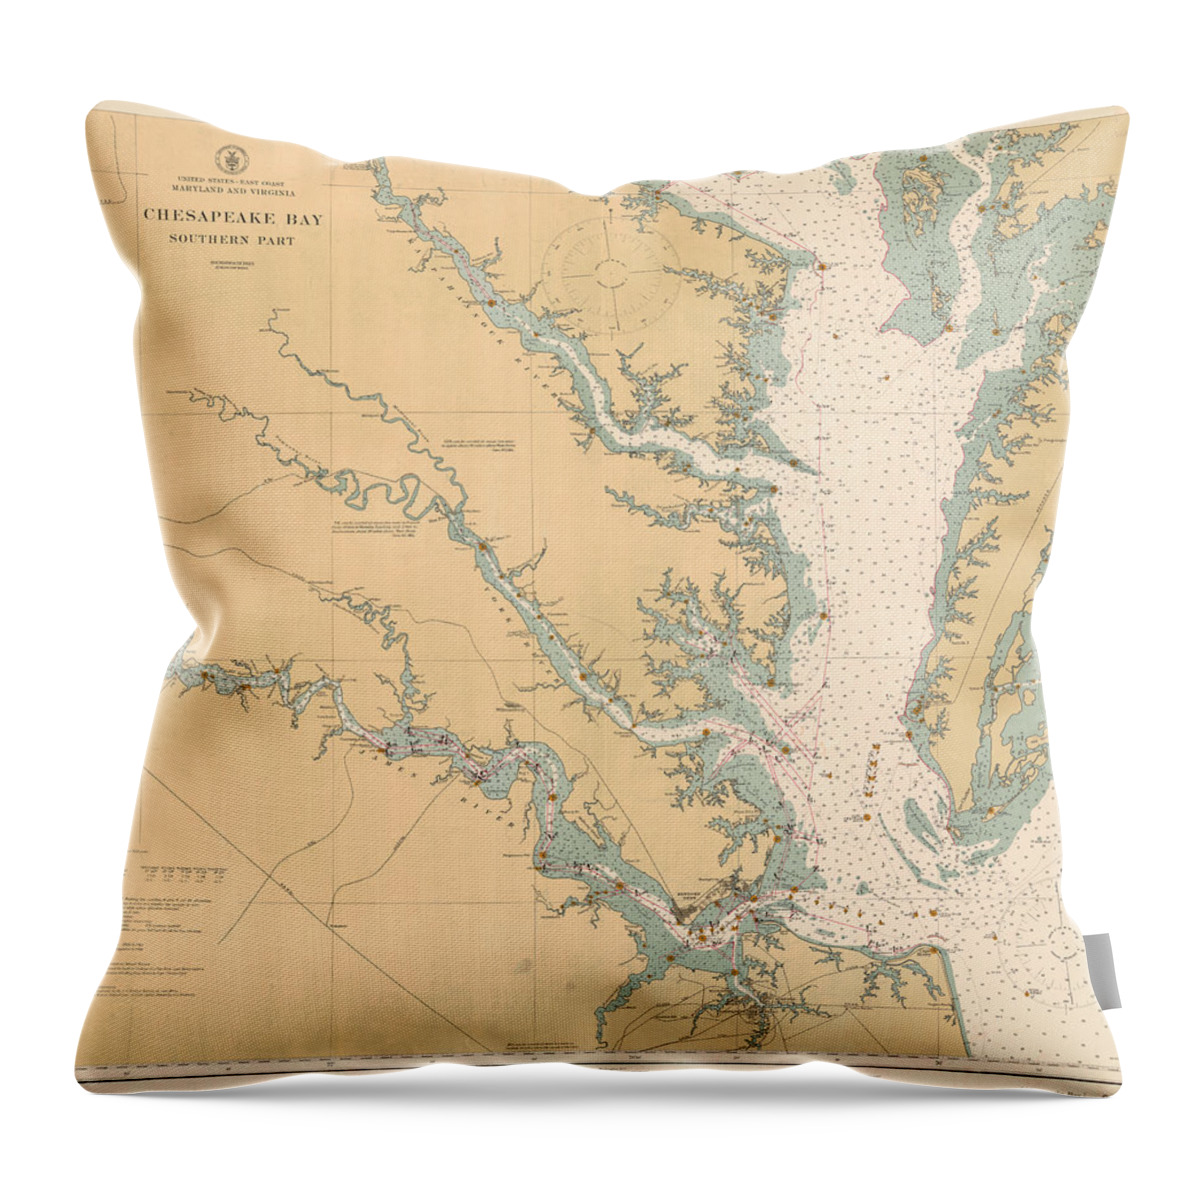 Chesapeake Bay Southern Part Throw Pillow featuring the digital art Chesapeake Bay Southern Part, Coast and Geodetic Survey Chart 78, Vintage 1914 by Nautical Chartworks